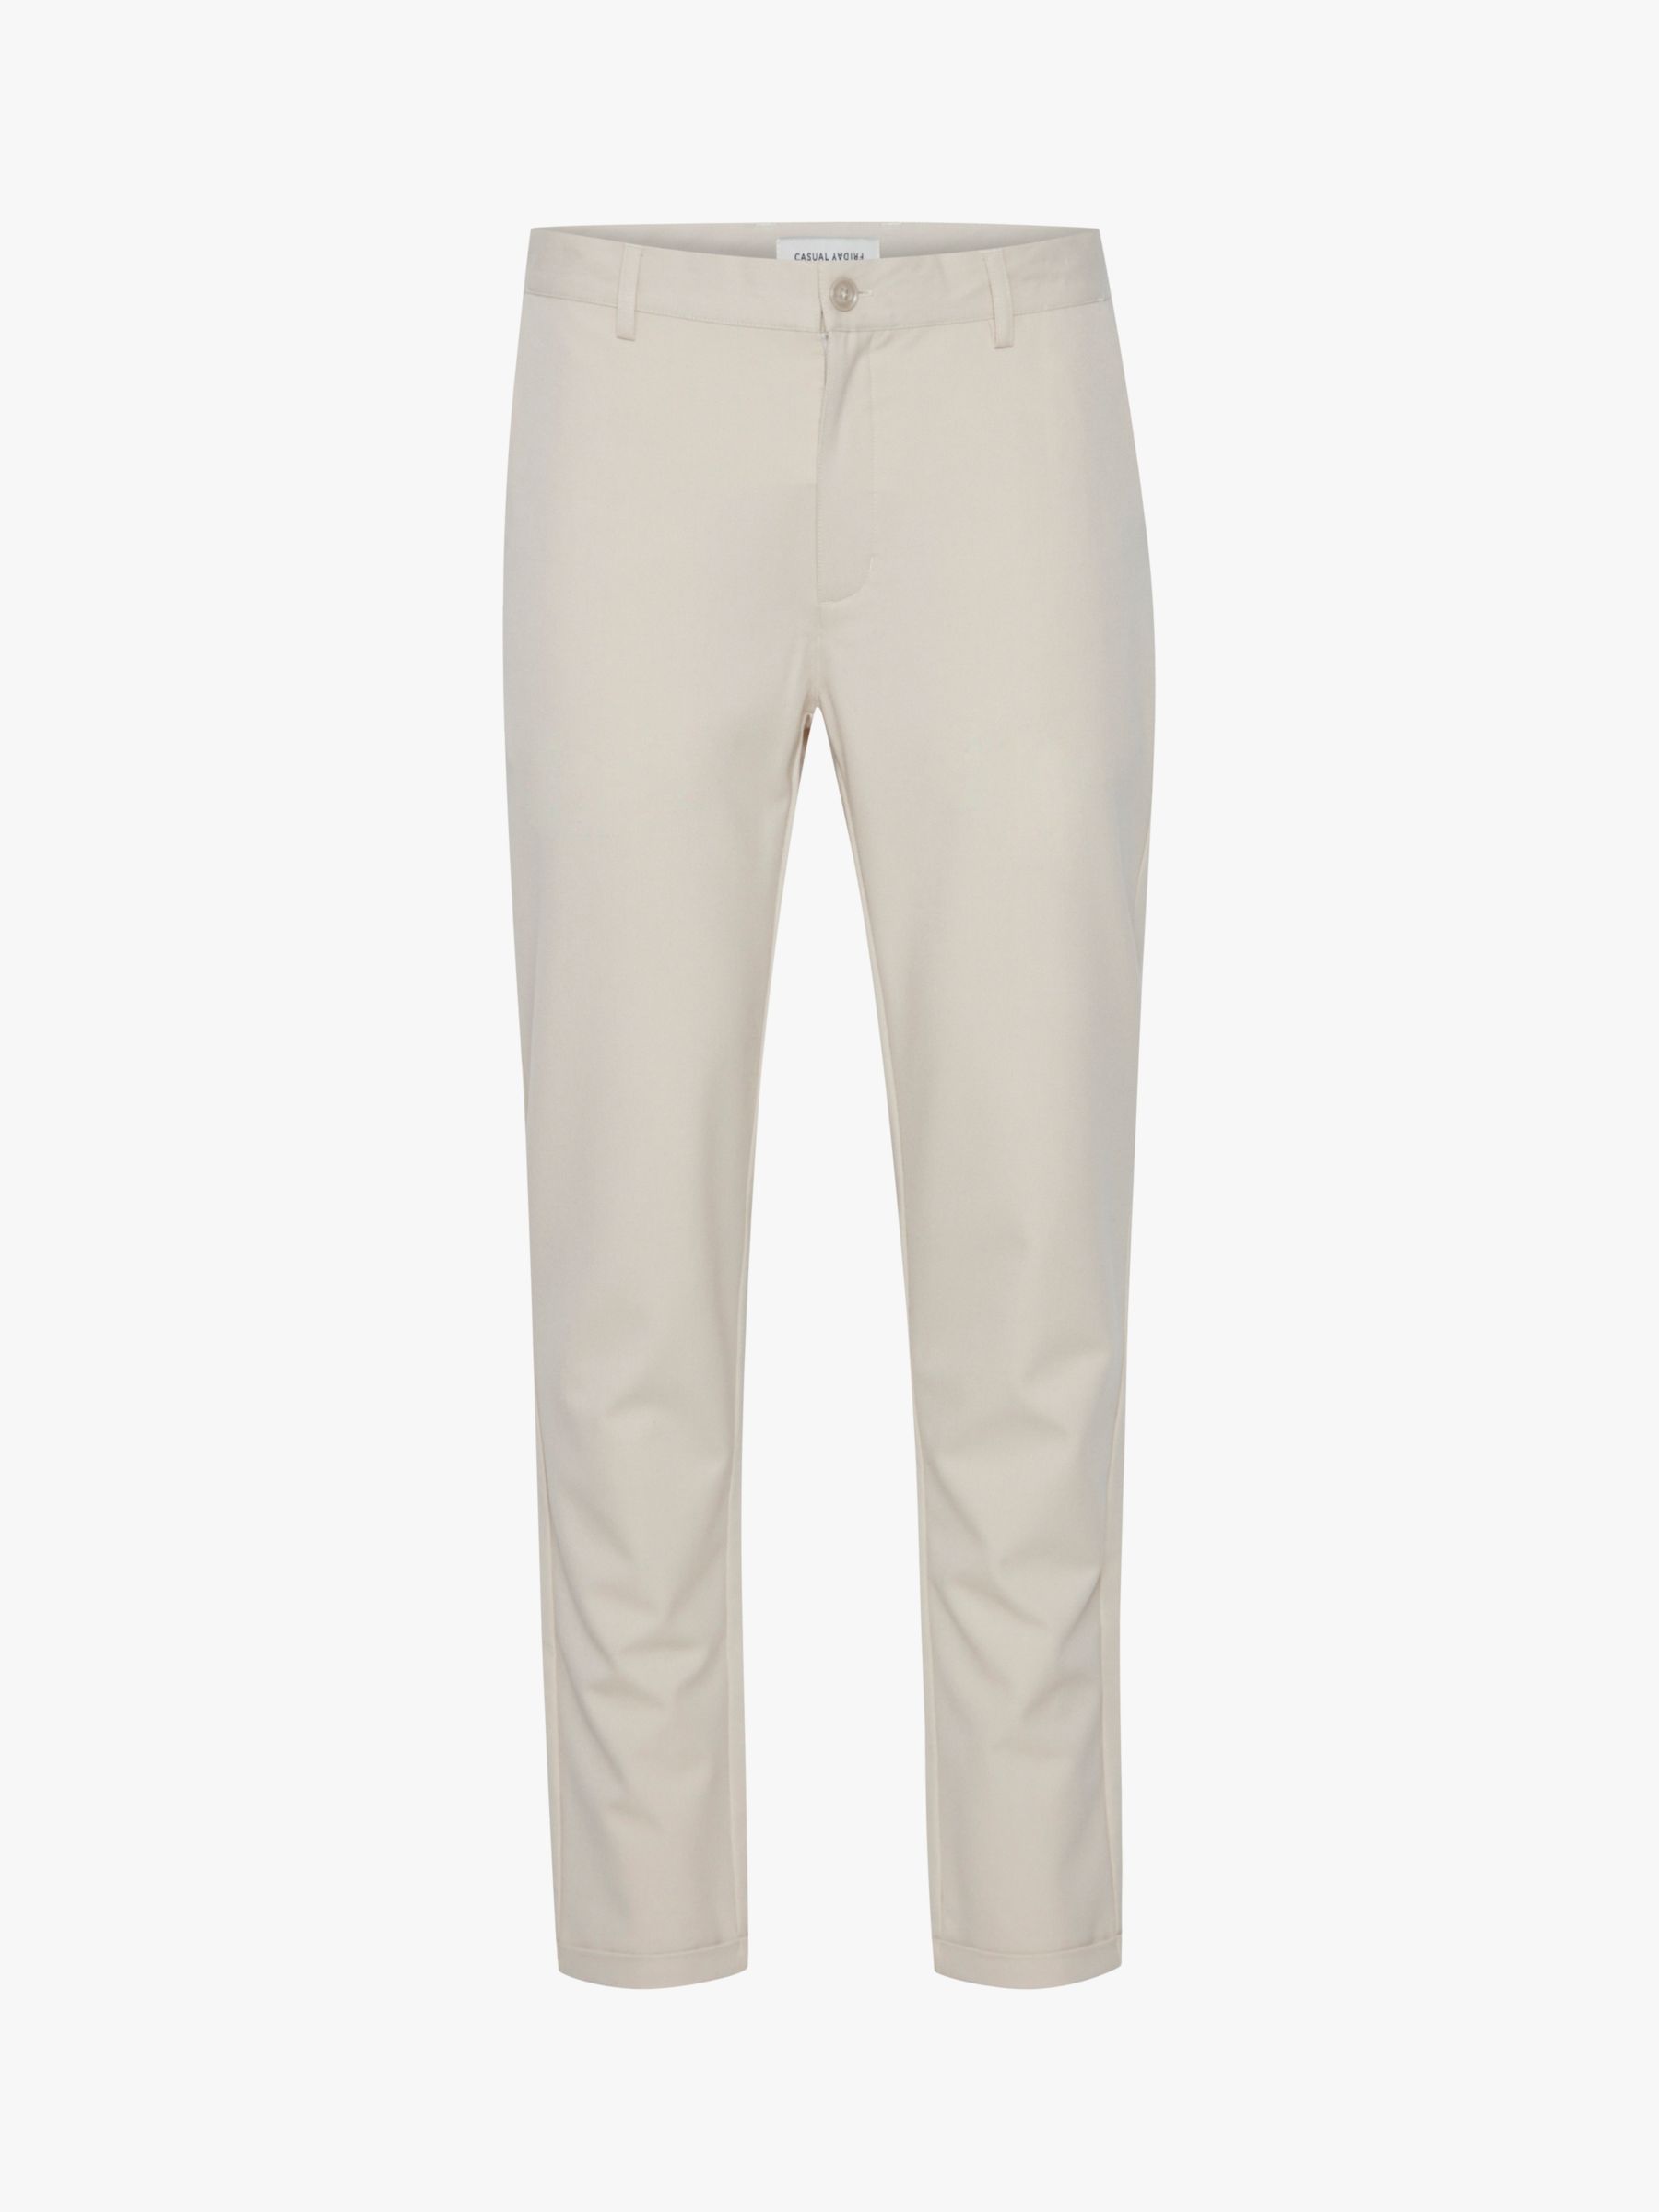 Casual Friday Gale Stretch Slim Fit Trousers, Stone, 32S